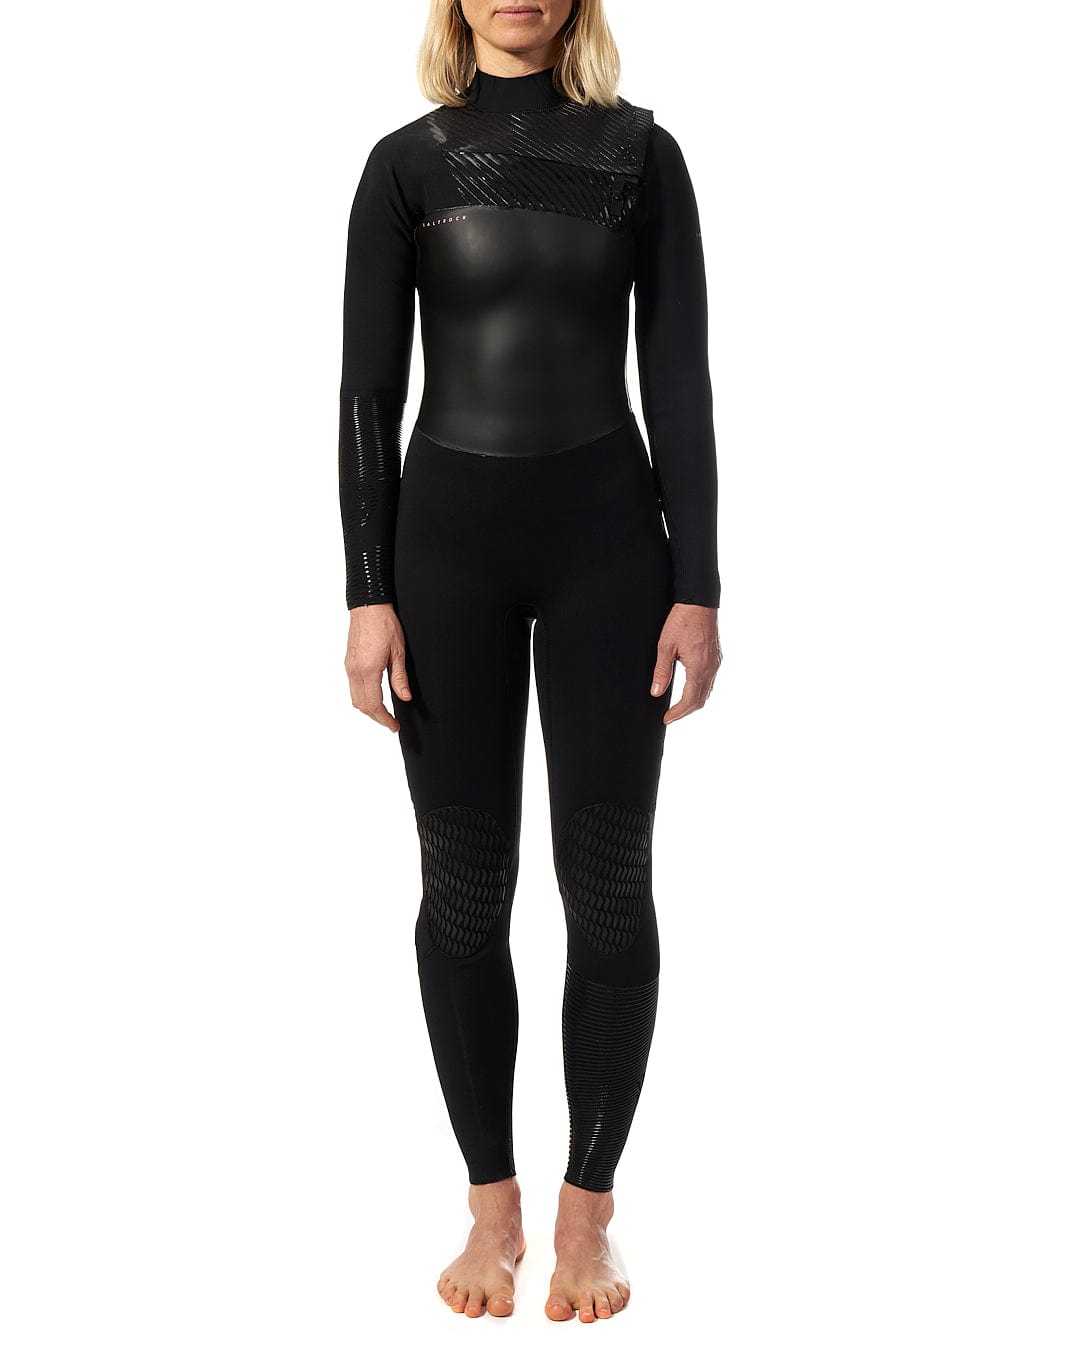 A woman in a Saltrock Shockwave - Womens 3/2 Front Zip Full Wetsuit - Black standing in front of a white background.